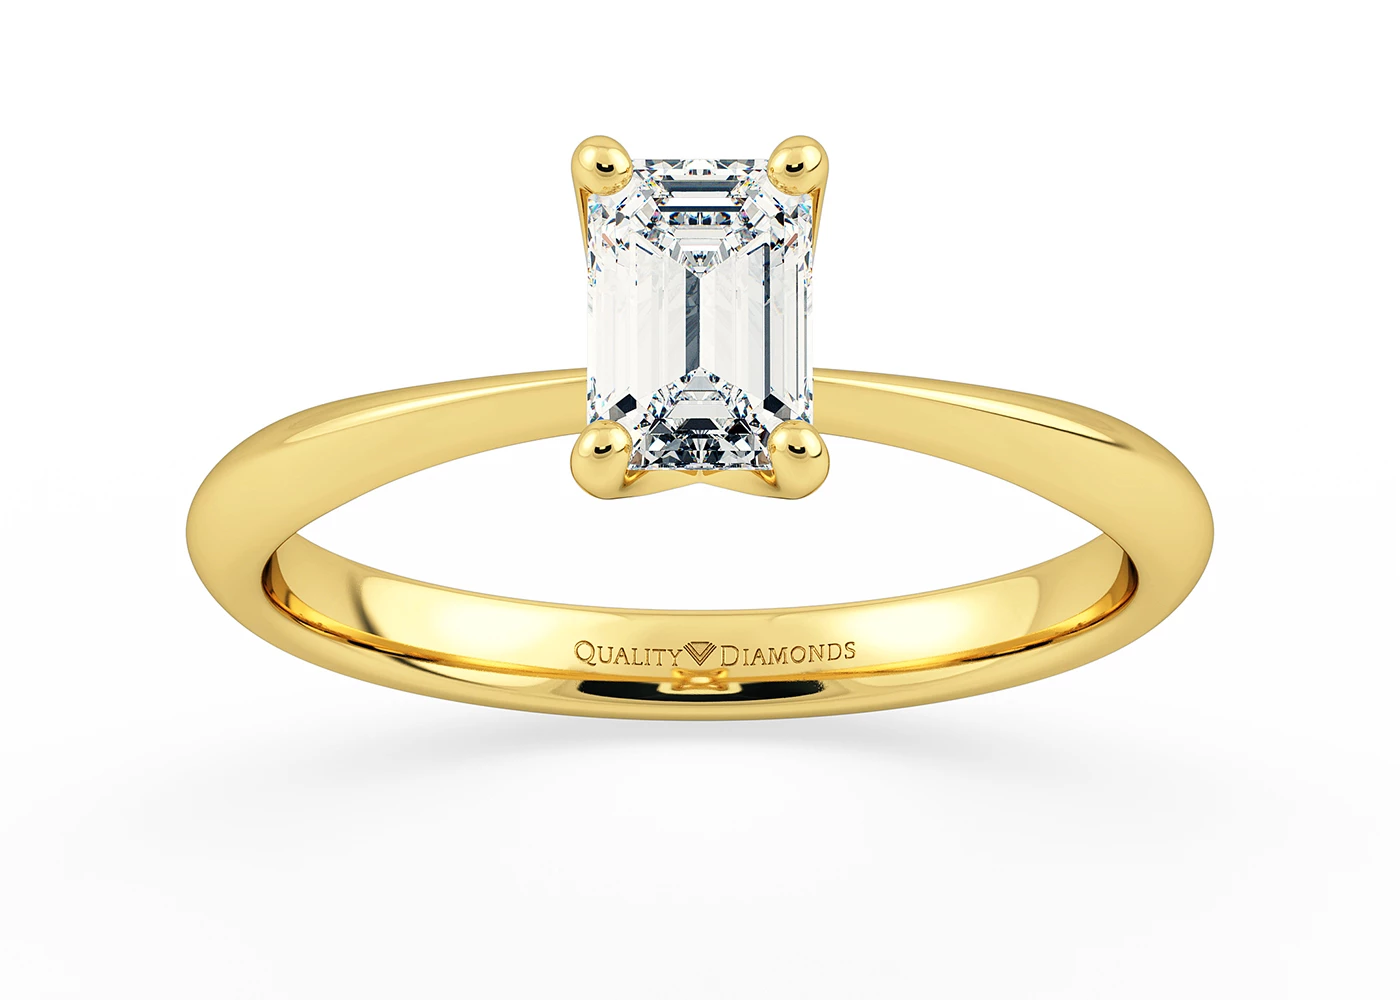 One Carat Emerald Solitaire Diamond Engagement Ring in 18K Yellow Gold